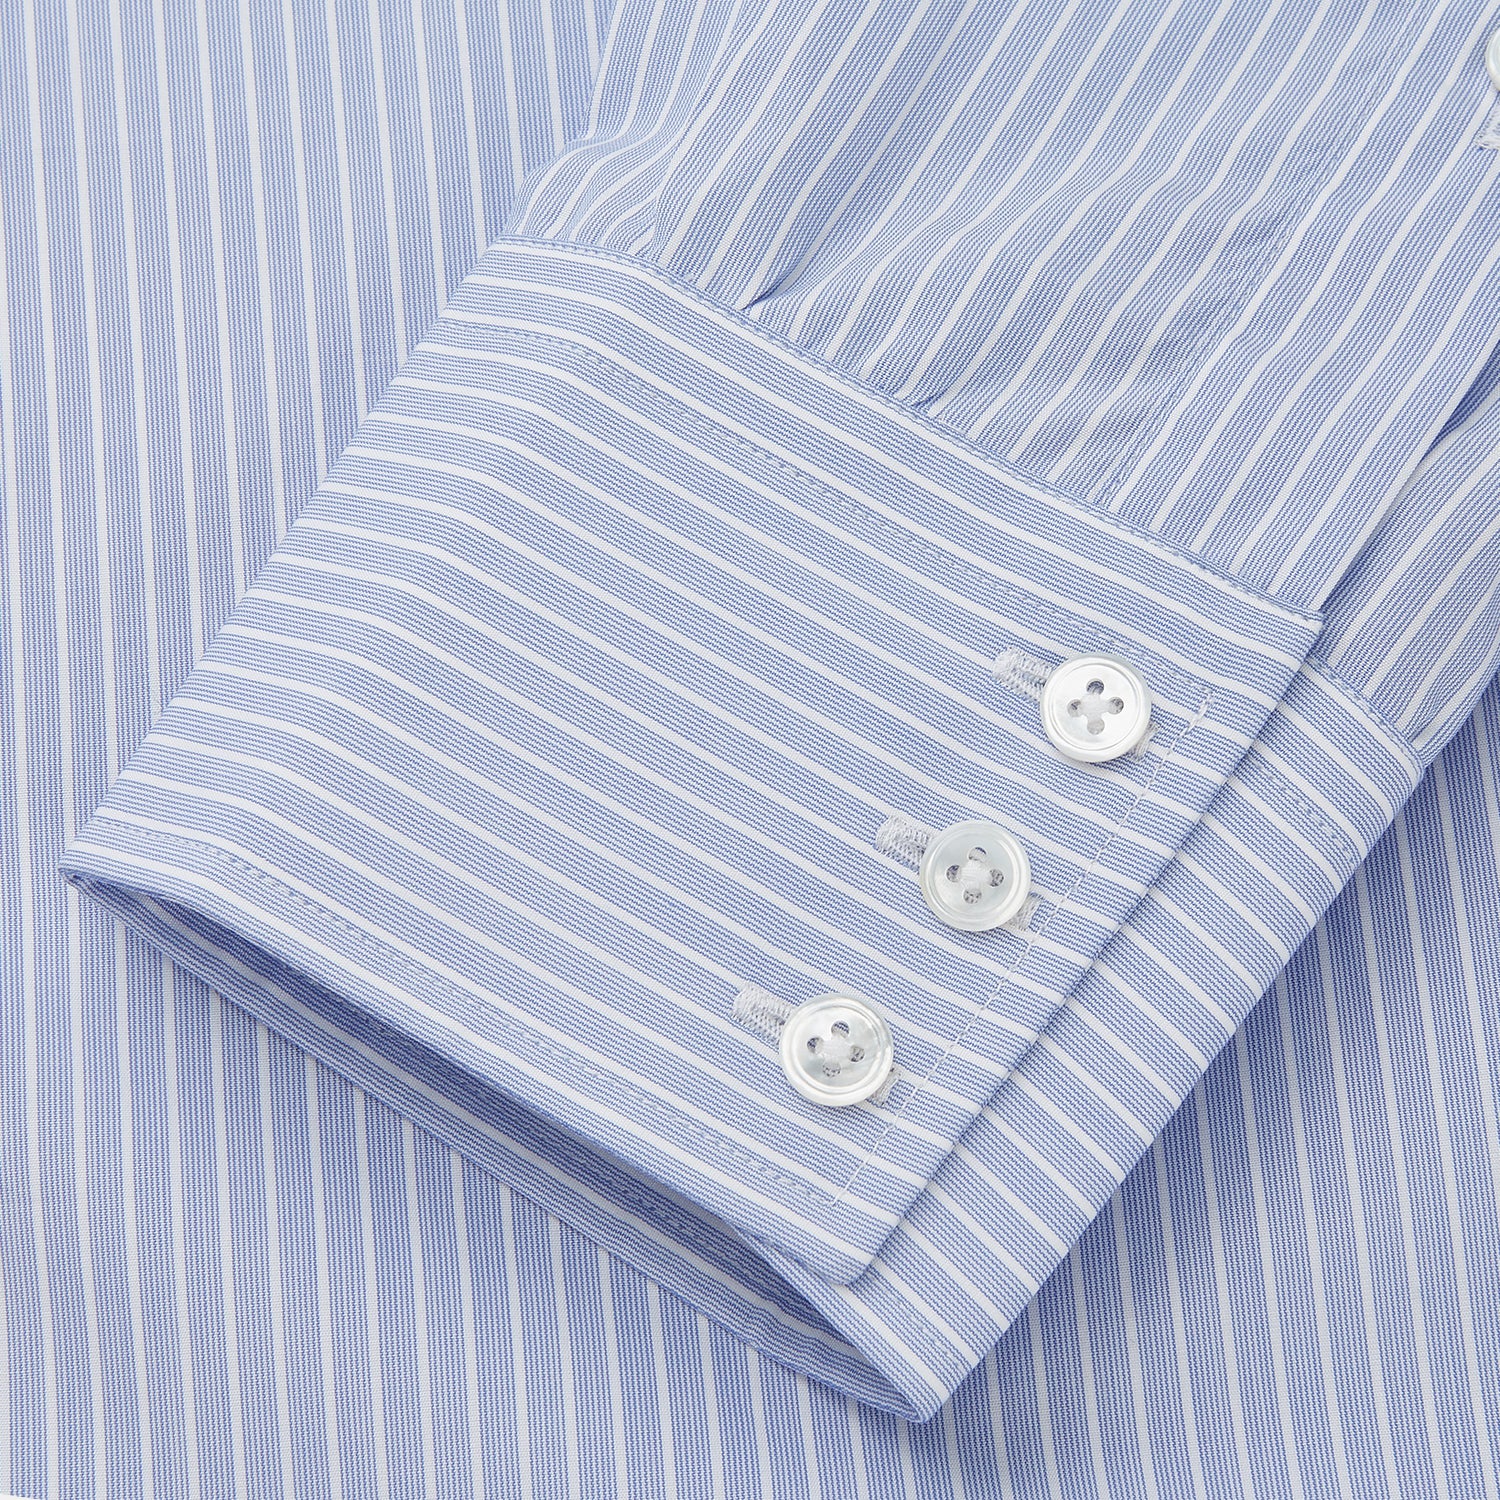 Blue And White Stripe Sea Island Quality Cotton Shirt With T&A Collar and 3-Button Cuffs